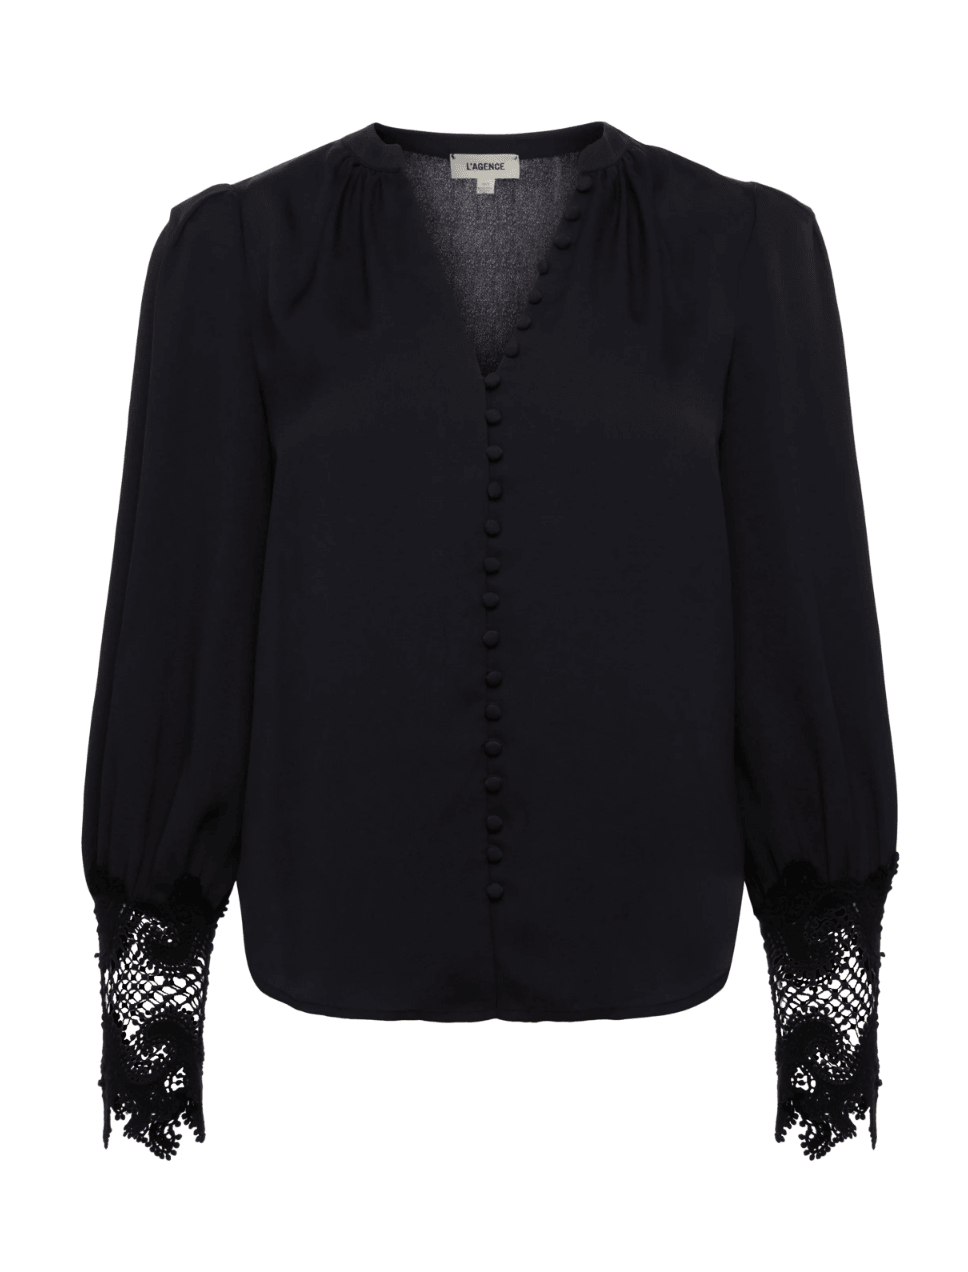 Ava Lace Cuff Blouse 60% OFF - EnlightenLiving